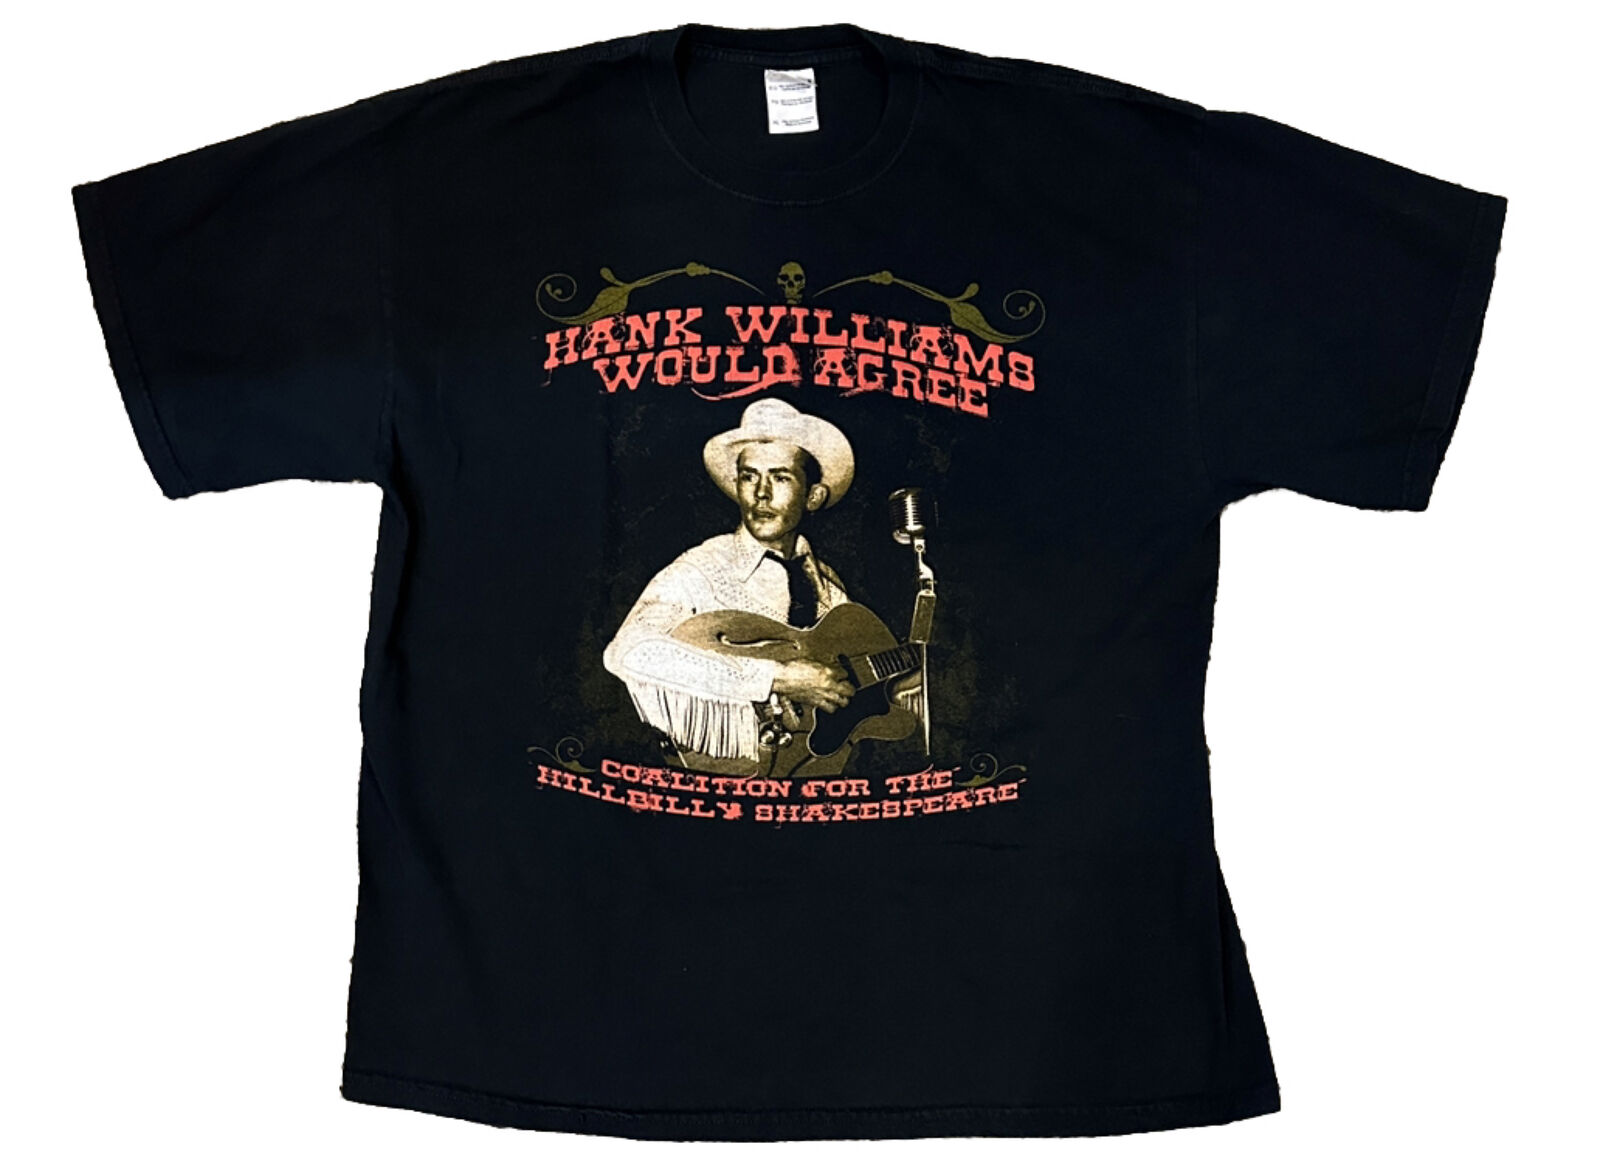 Vintage Hank Williams “Hank Williams Would Agree” The Grand Ole Opry XL T-Shirt